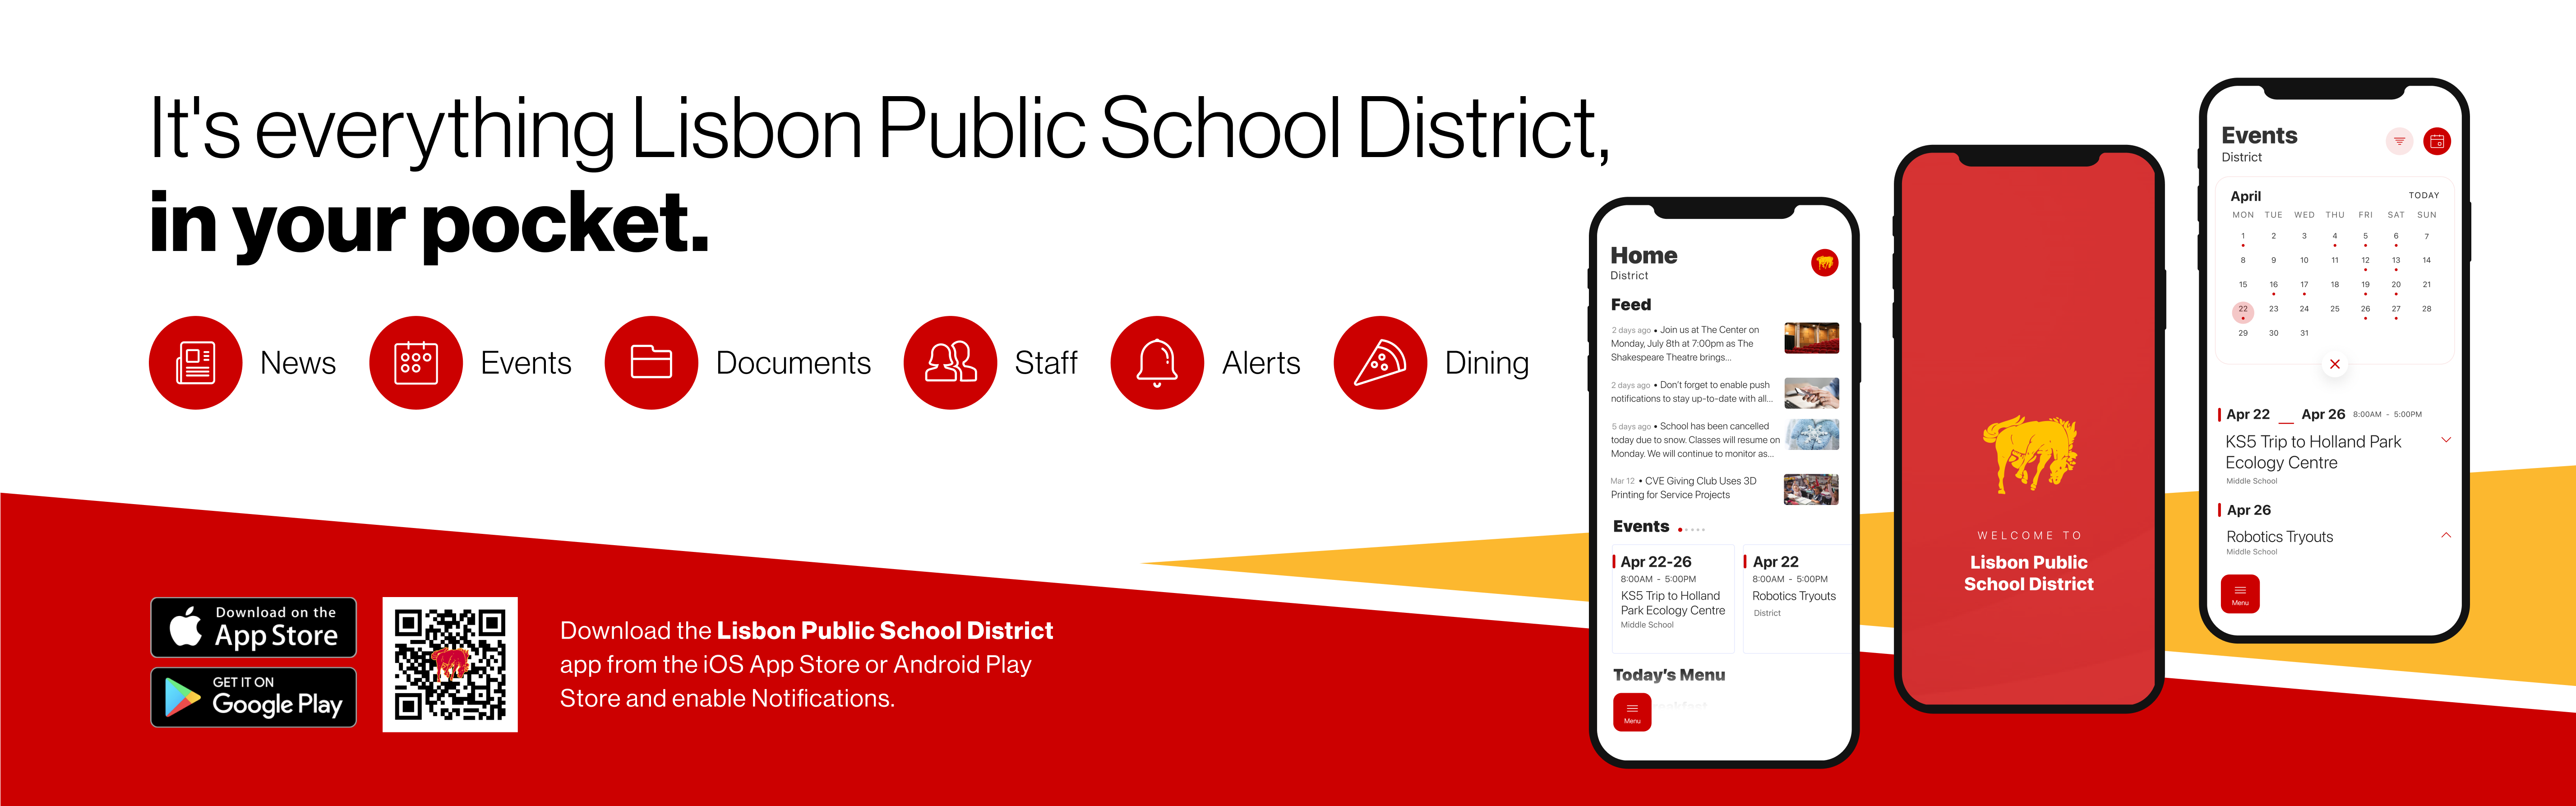 It's everything Lisbon PUblic School District, in your pocket.